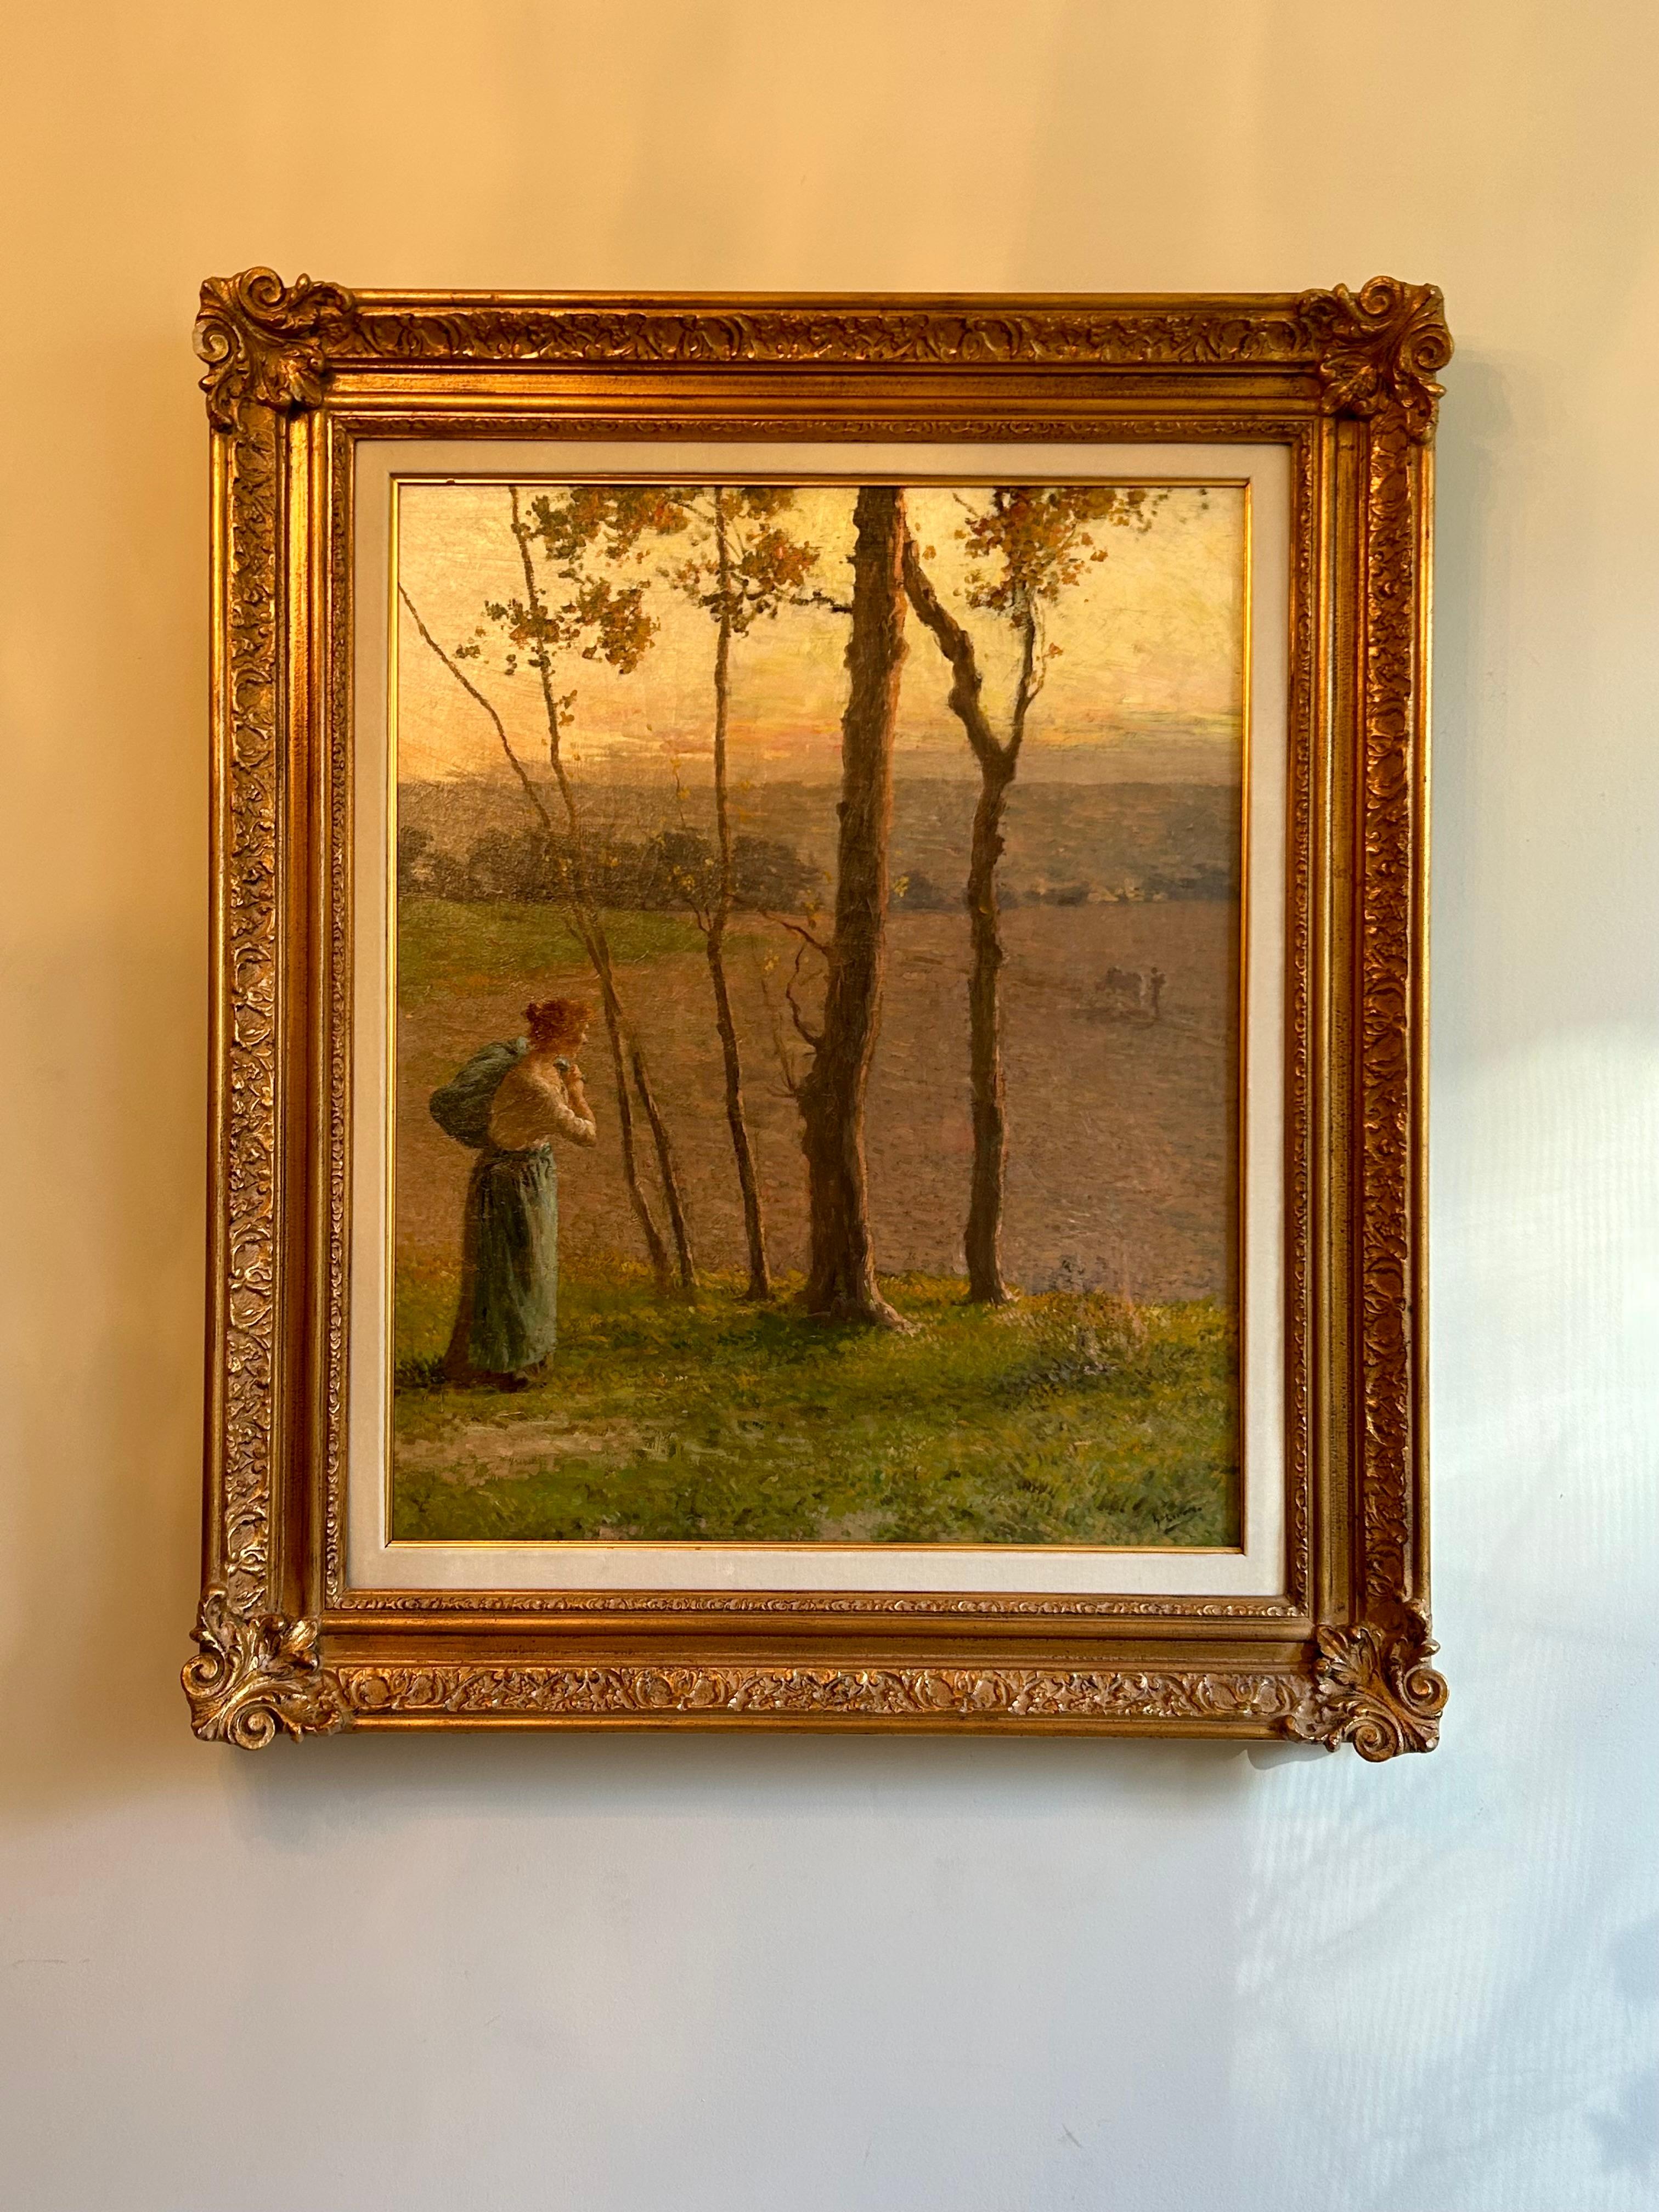 A beautiful painting by American painter André Gisson, in a substantial gilt frame. Gisson was renowned for his Impressionist style paintings, and is widely collected. This piece combines his passion for landscape with the solitary figure of a